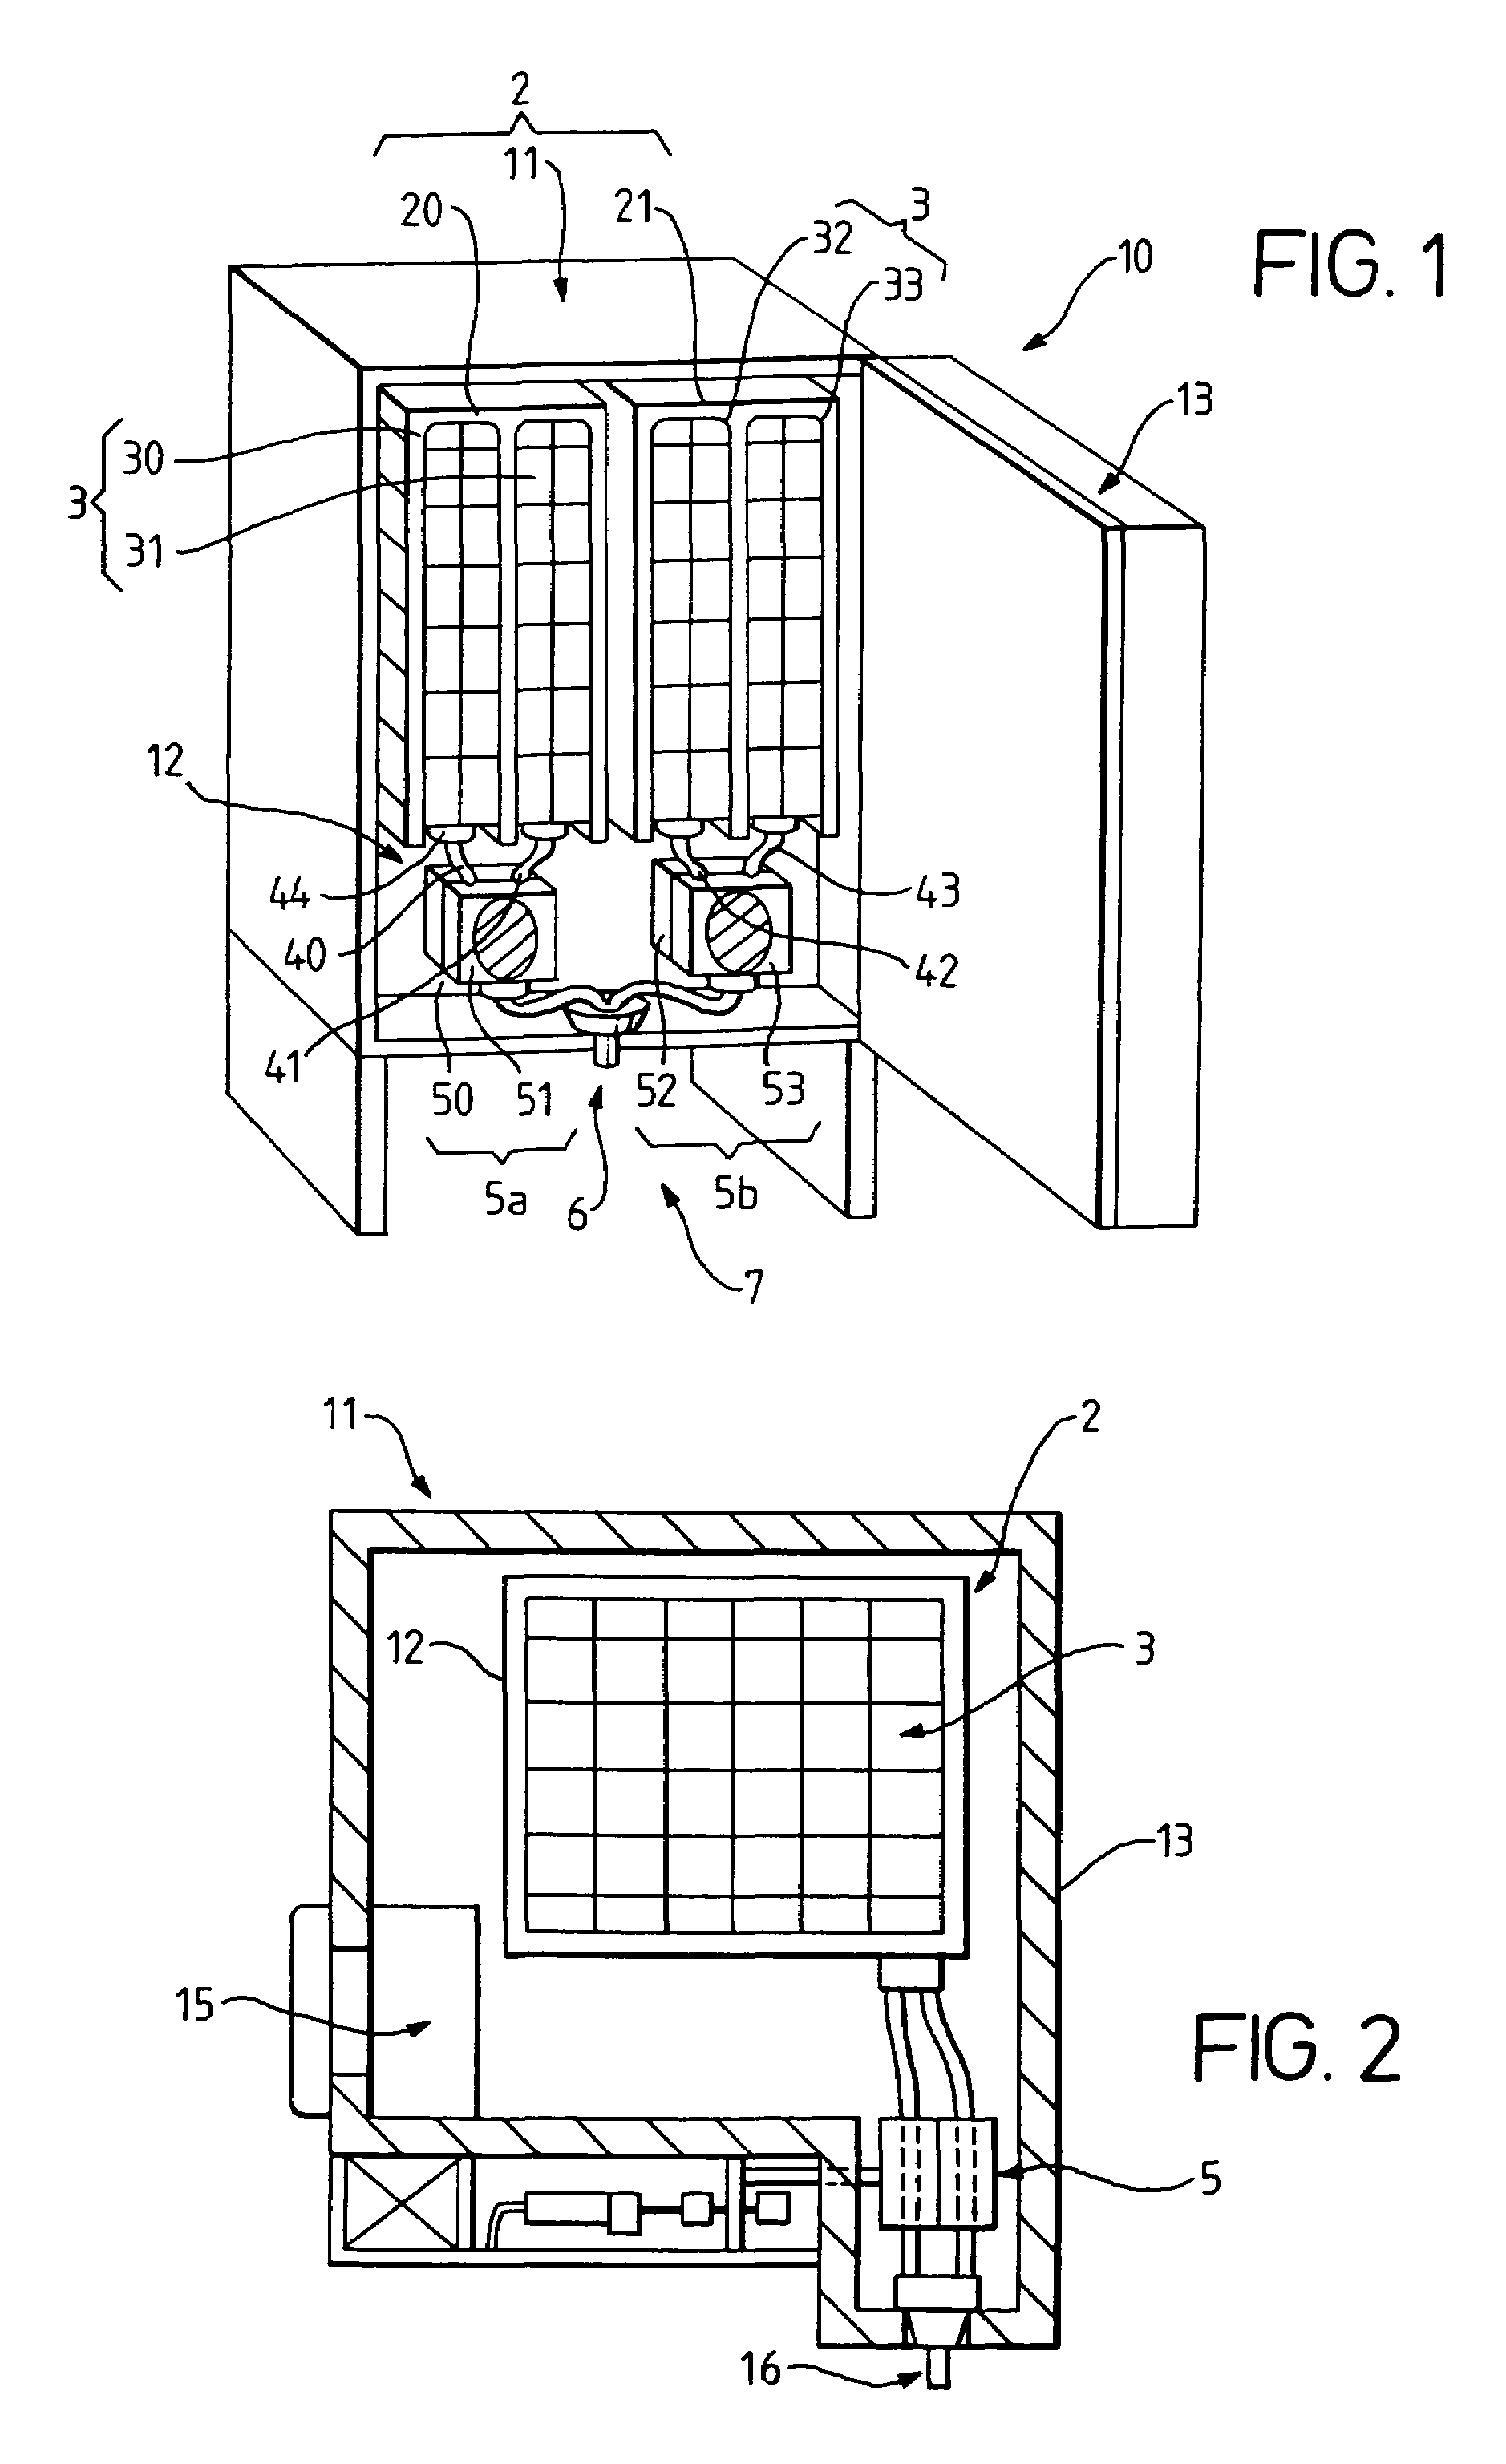 Device and method for on-demand dispensing of spoonable or drinkable food products having visual appearance of multi-components